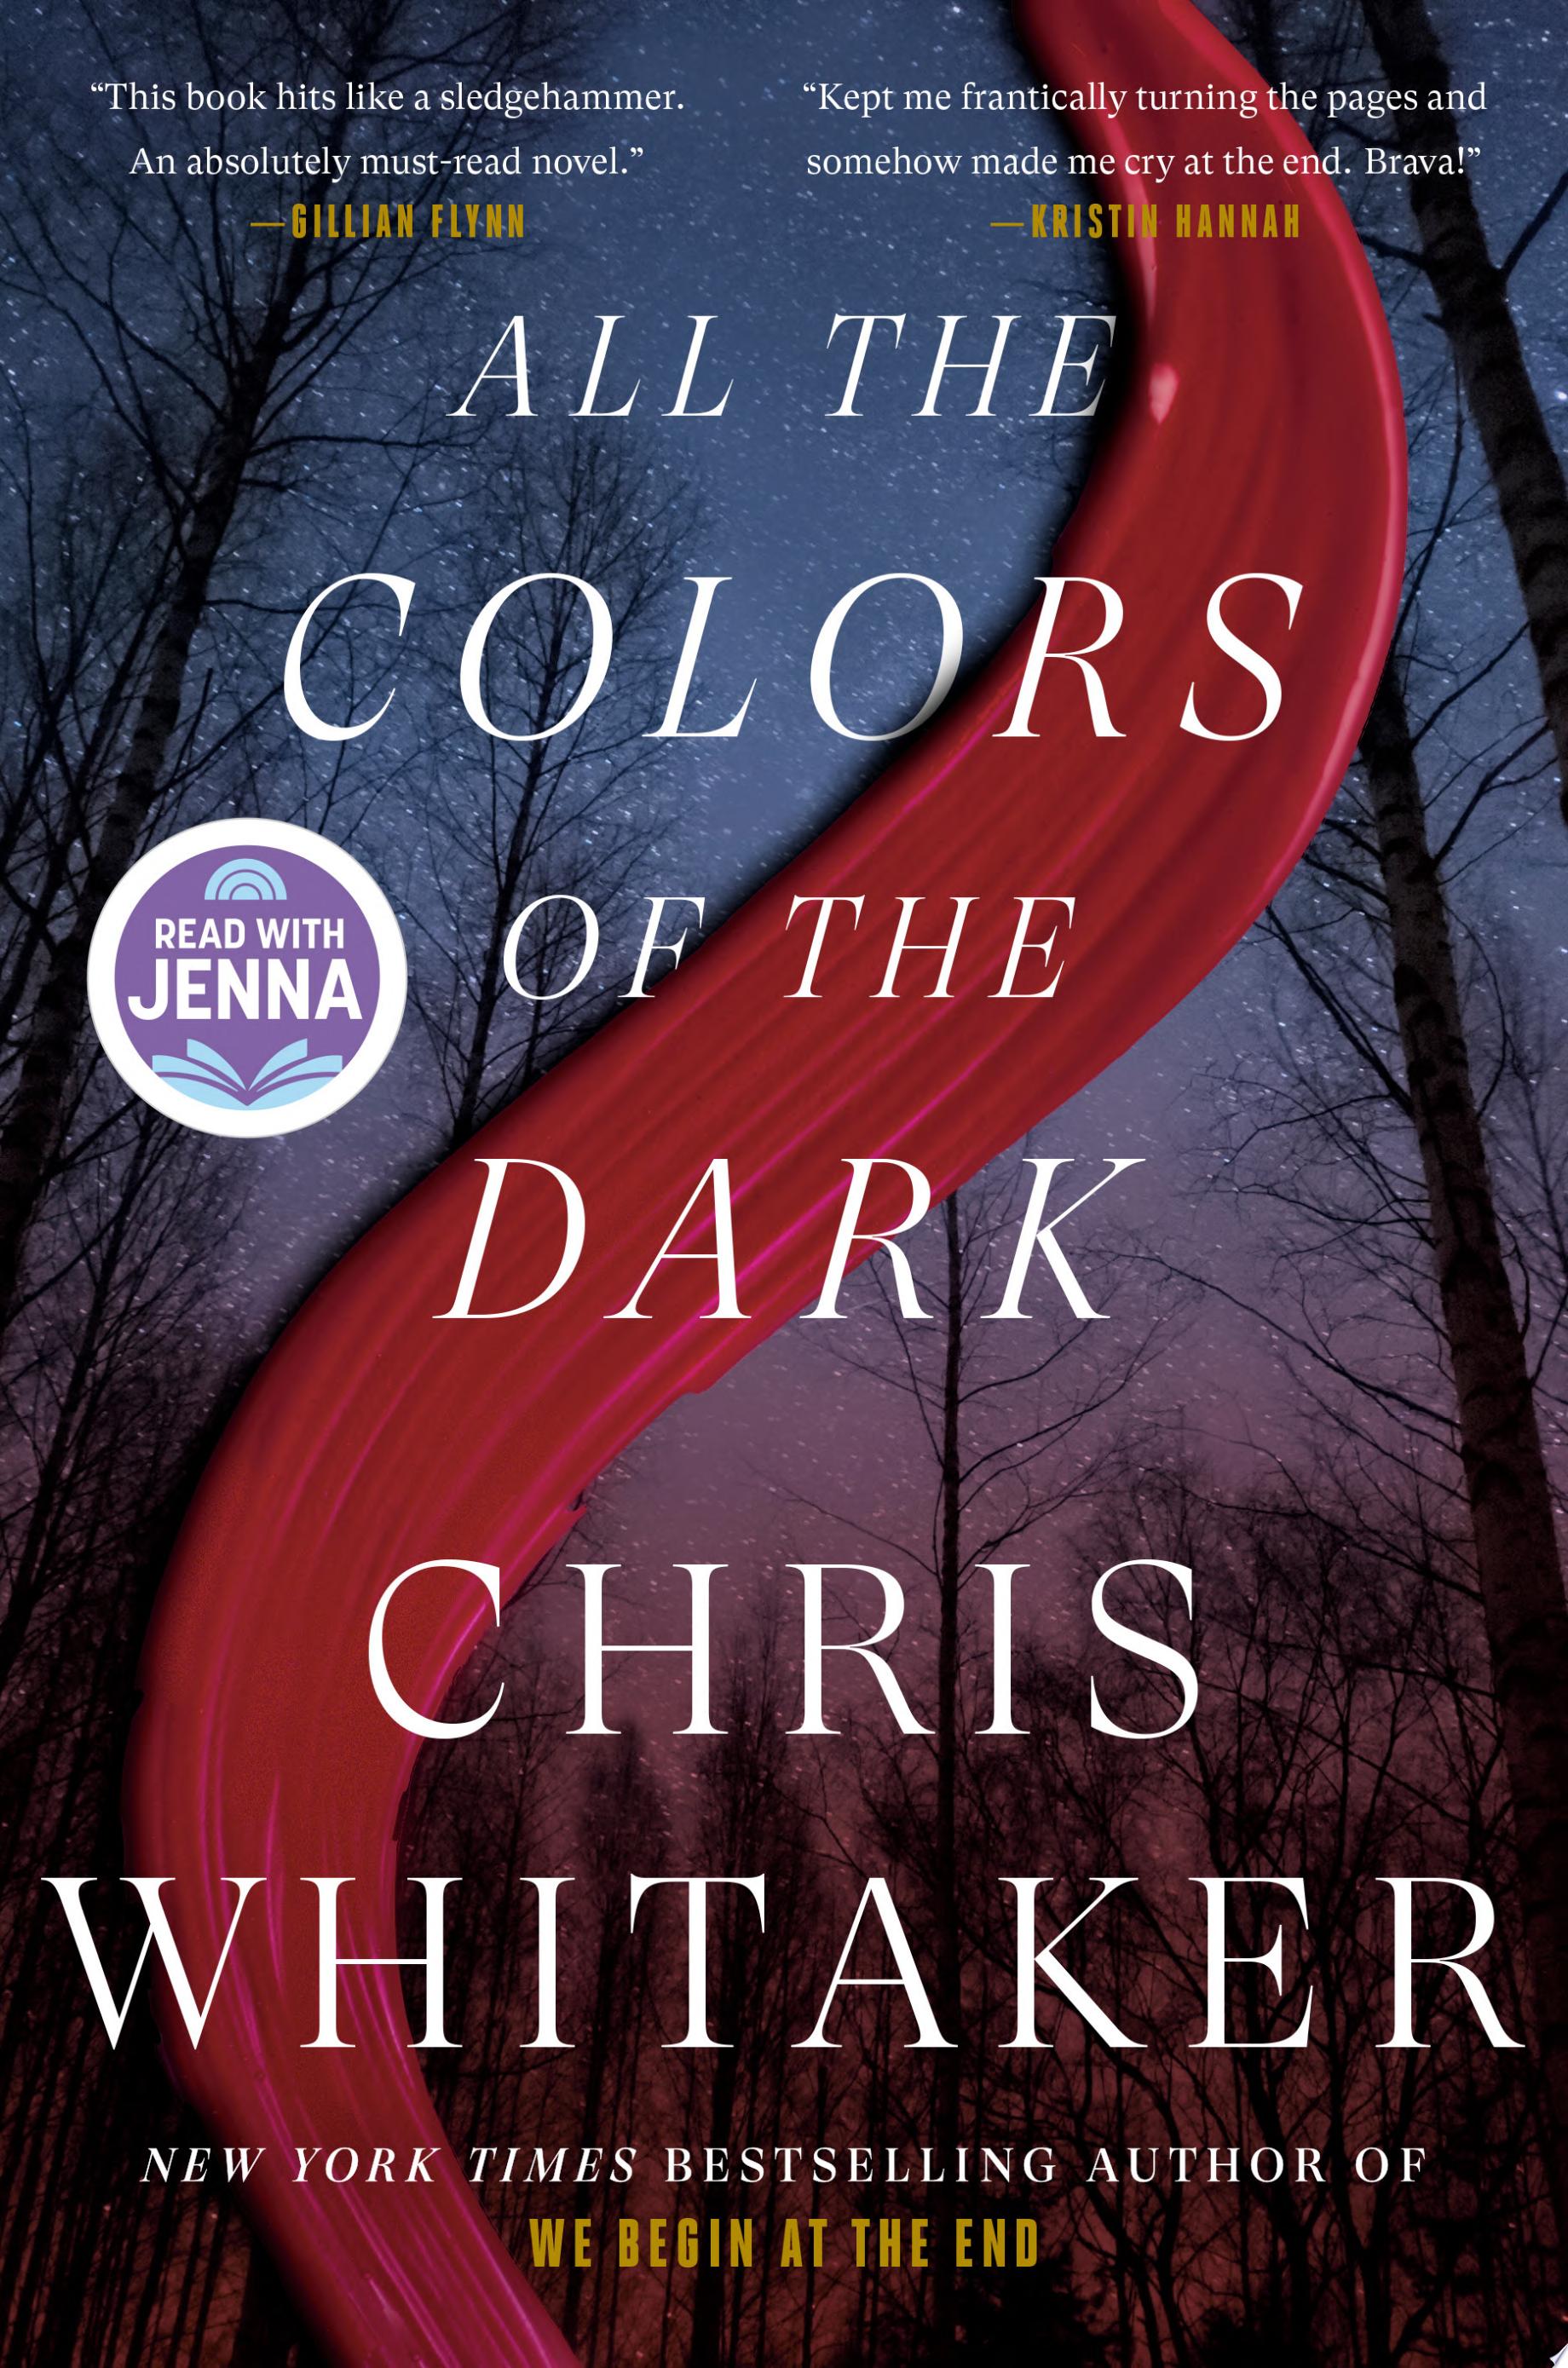 Image for "All the Colors of the Dark"